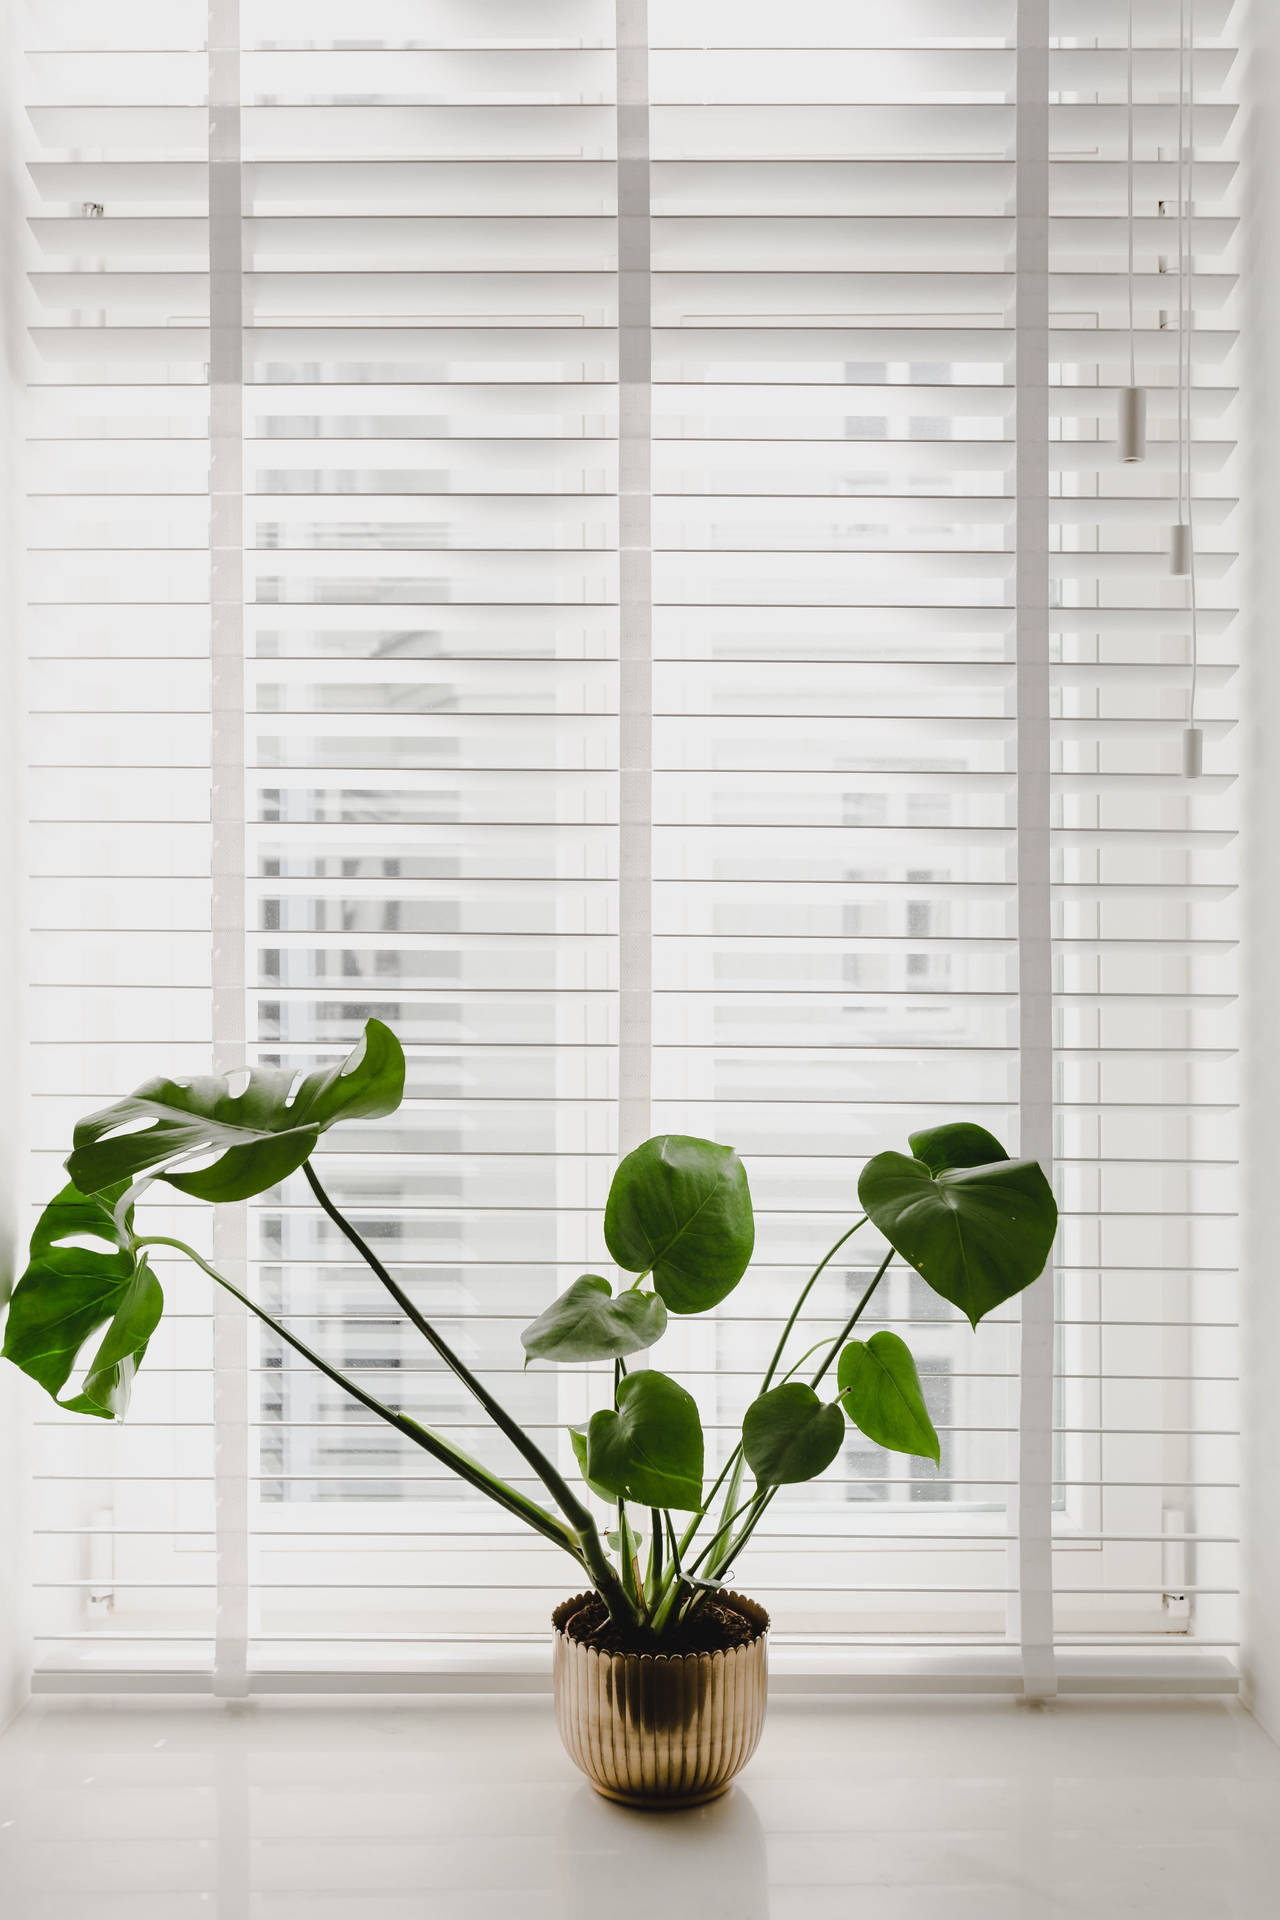 Monstera Plant 4k Background With Window